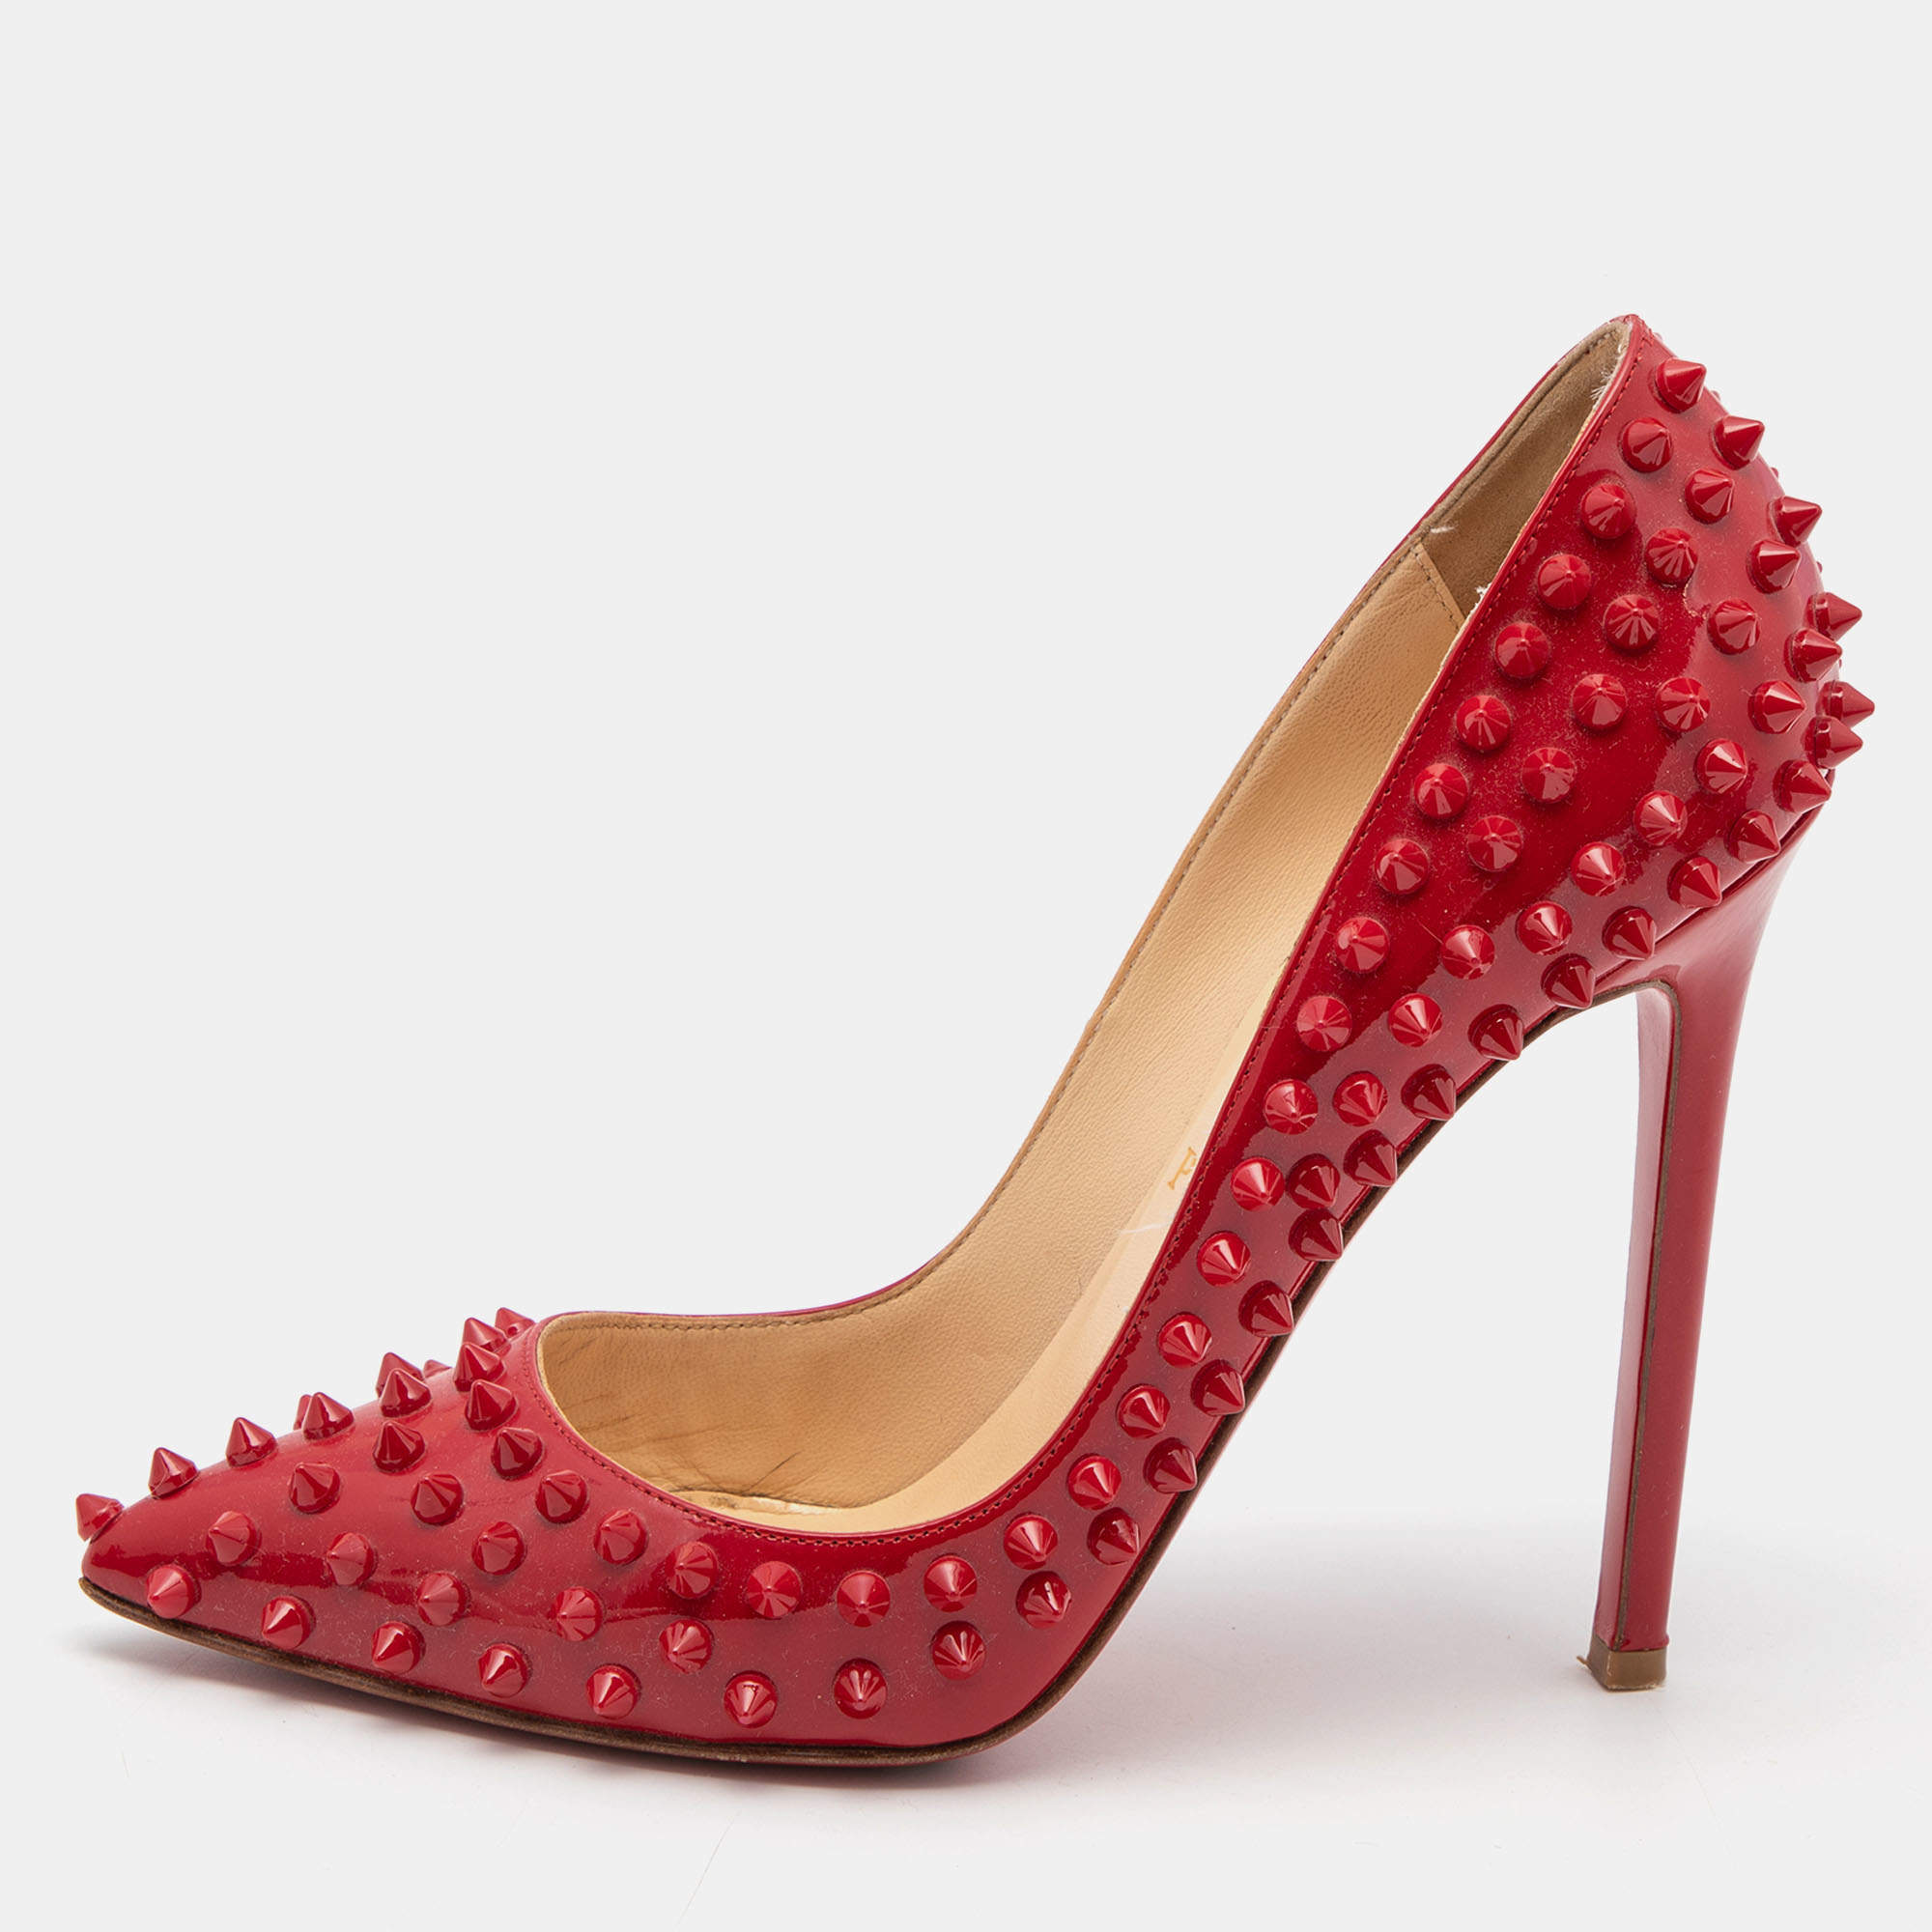 Christian Louboutin Red Patent Pigalle Spike Pumps Christian Louboutin | TLC